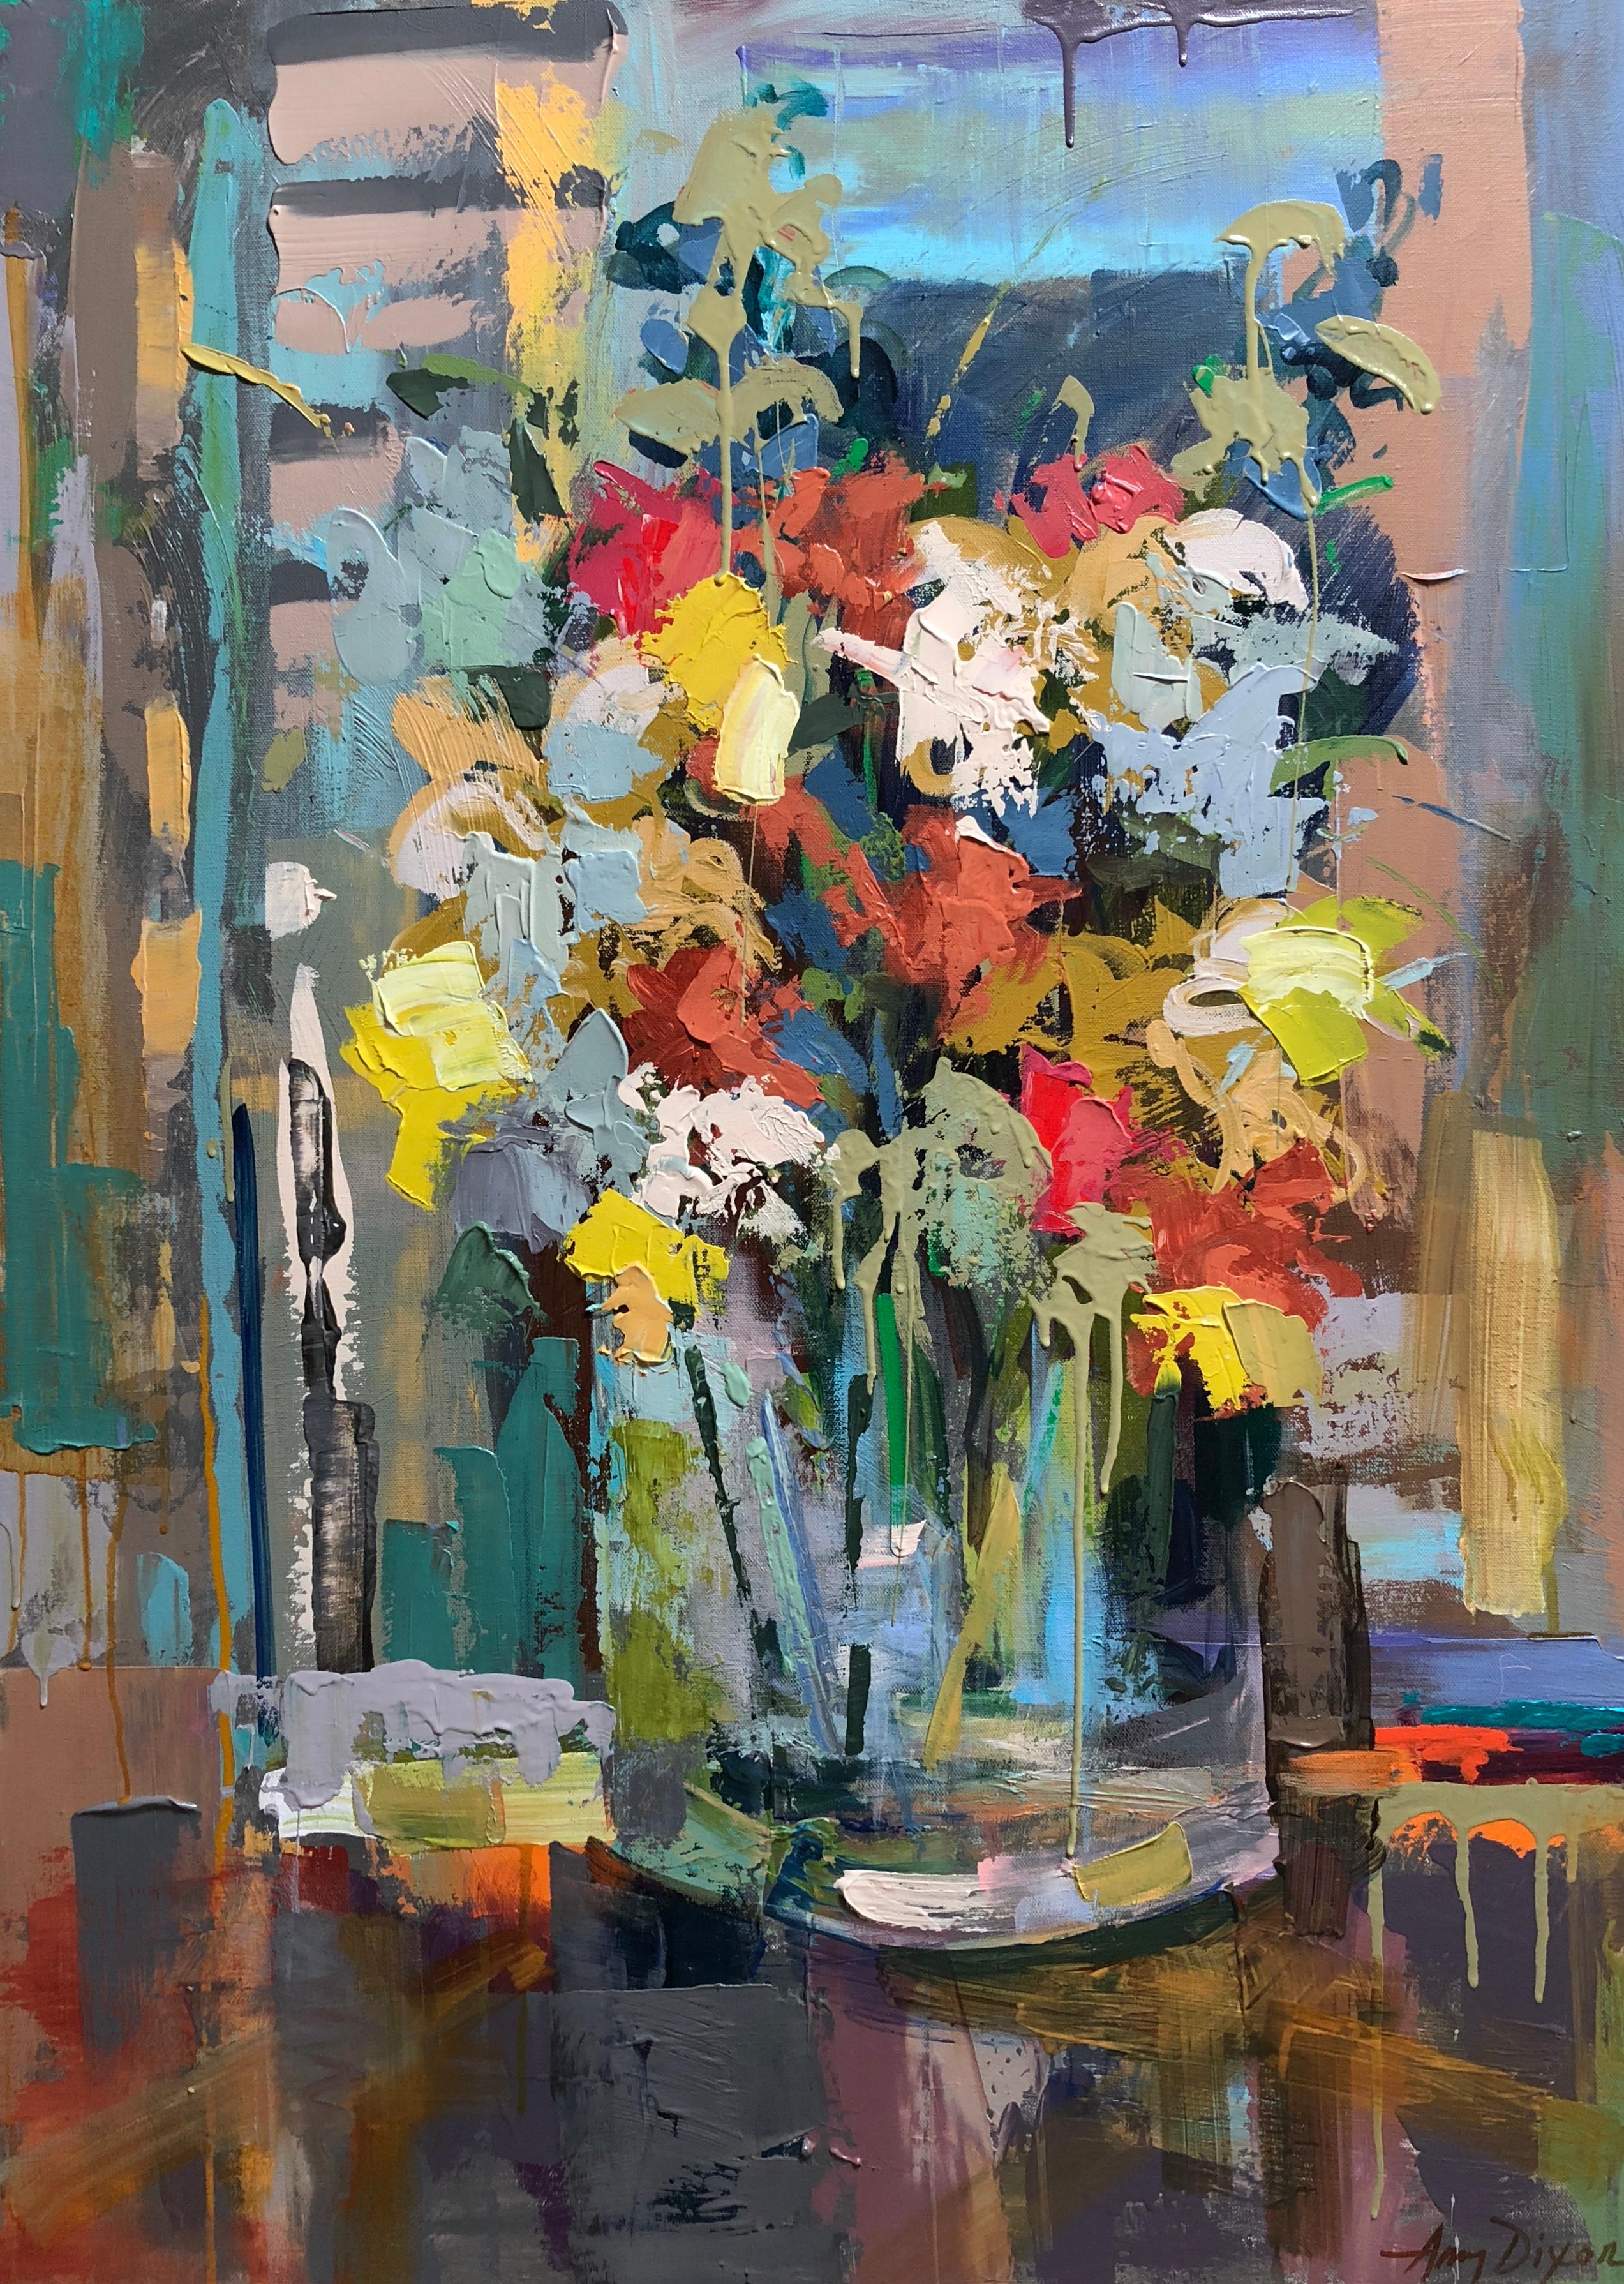 'Fringe of Fall' is a vertical acrylic on canvas abstract floral still-life painting created by American artist Amy Dixon in 2018. Featuring a vibrant palette made of a variety of colors such as red, yellow, orange, blue, green and purple, this